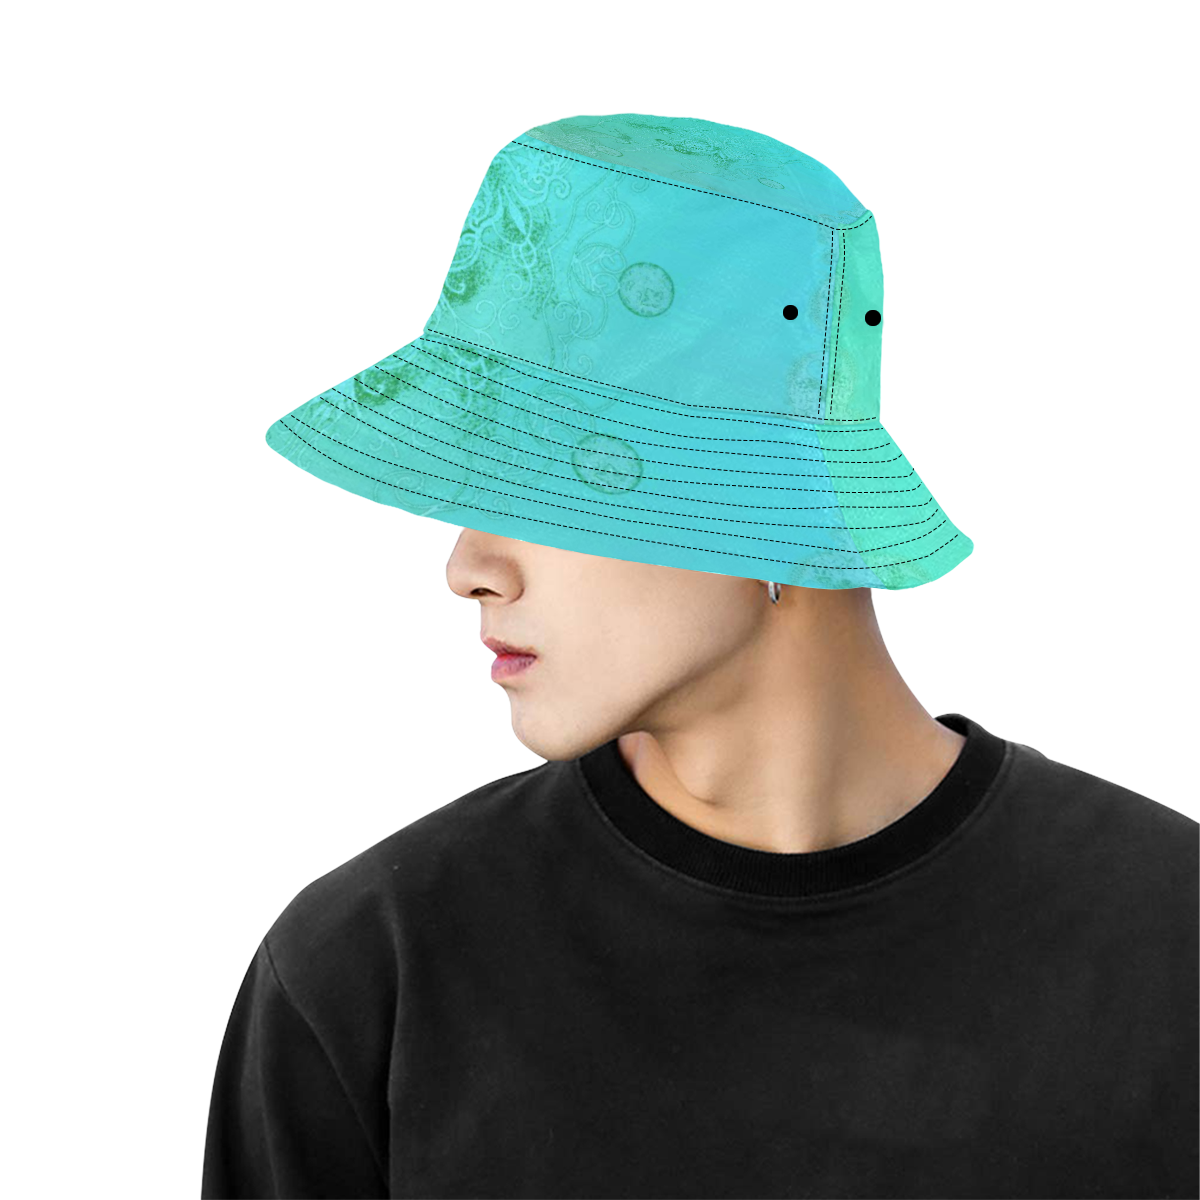 peacocq parade 22 All Over Print Bucket Hat for Men